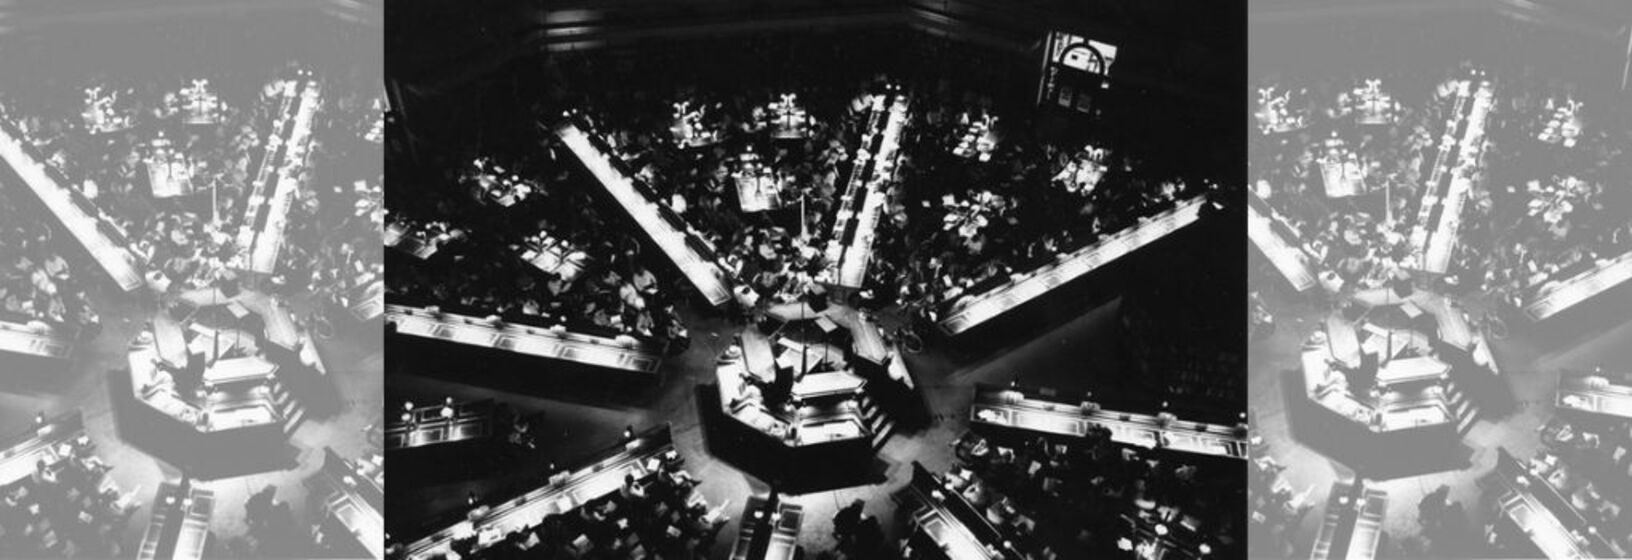 Black and white aerial image of a reading room in a large library